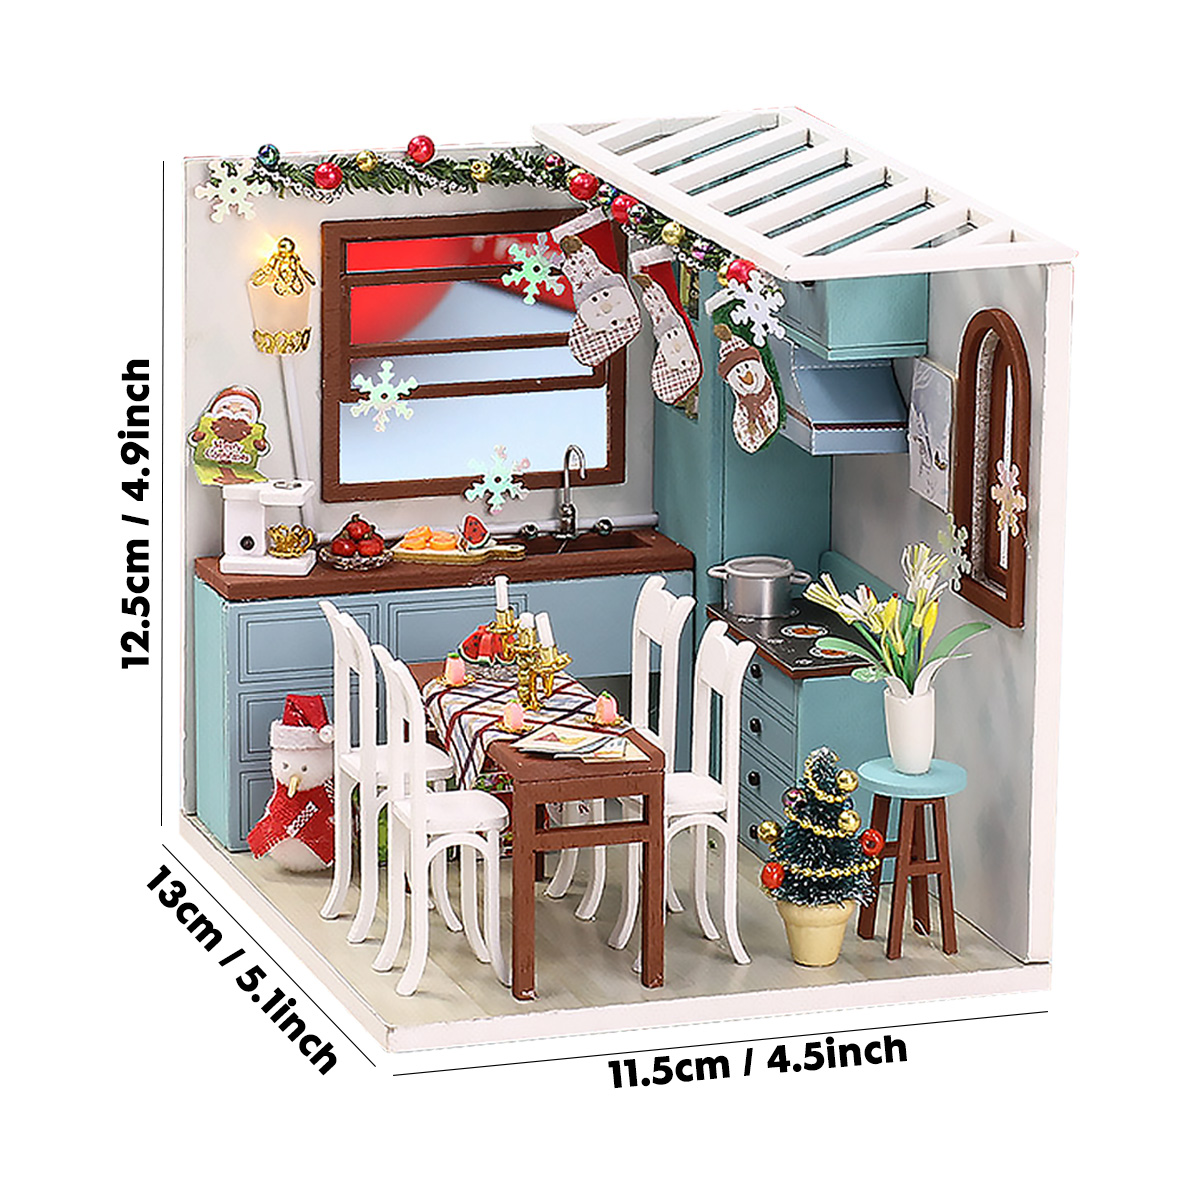 Wooden-Dining-Room-DIY-Handmade-Assemble-Doll-House-Miniature-Furniture-Kit-Education-Toy-with-LED-L-1737848-11